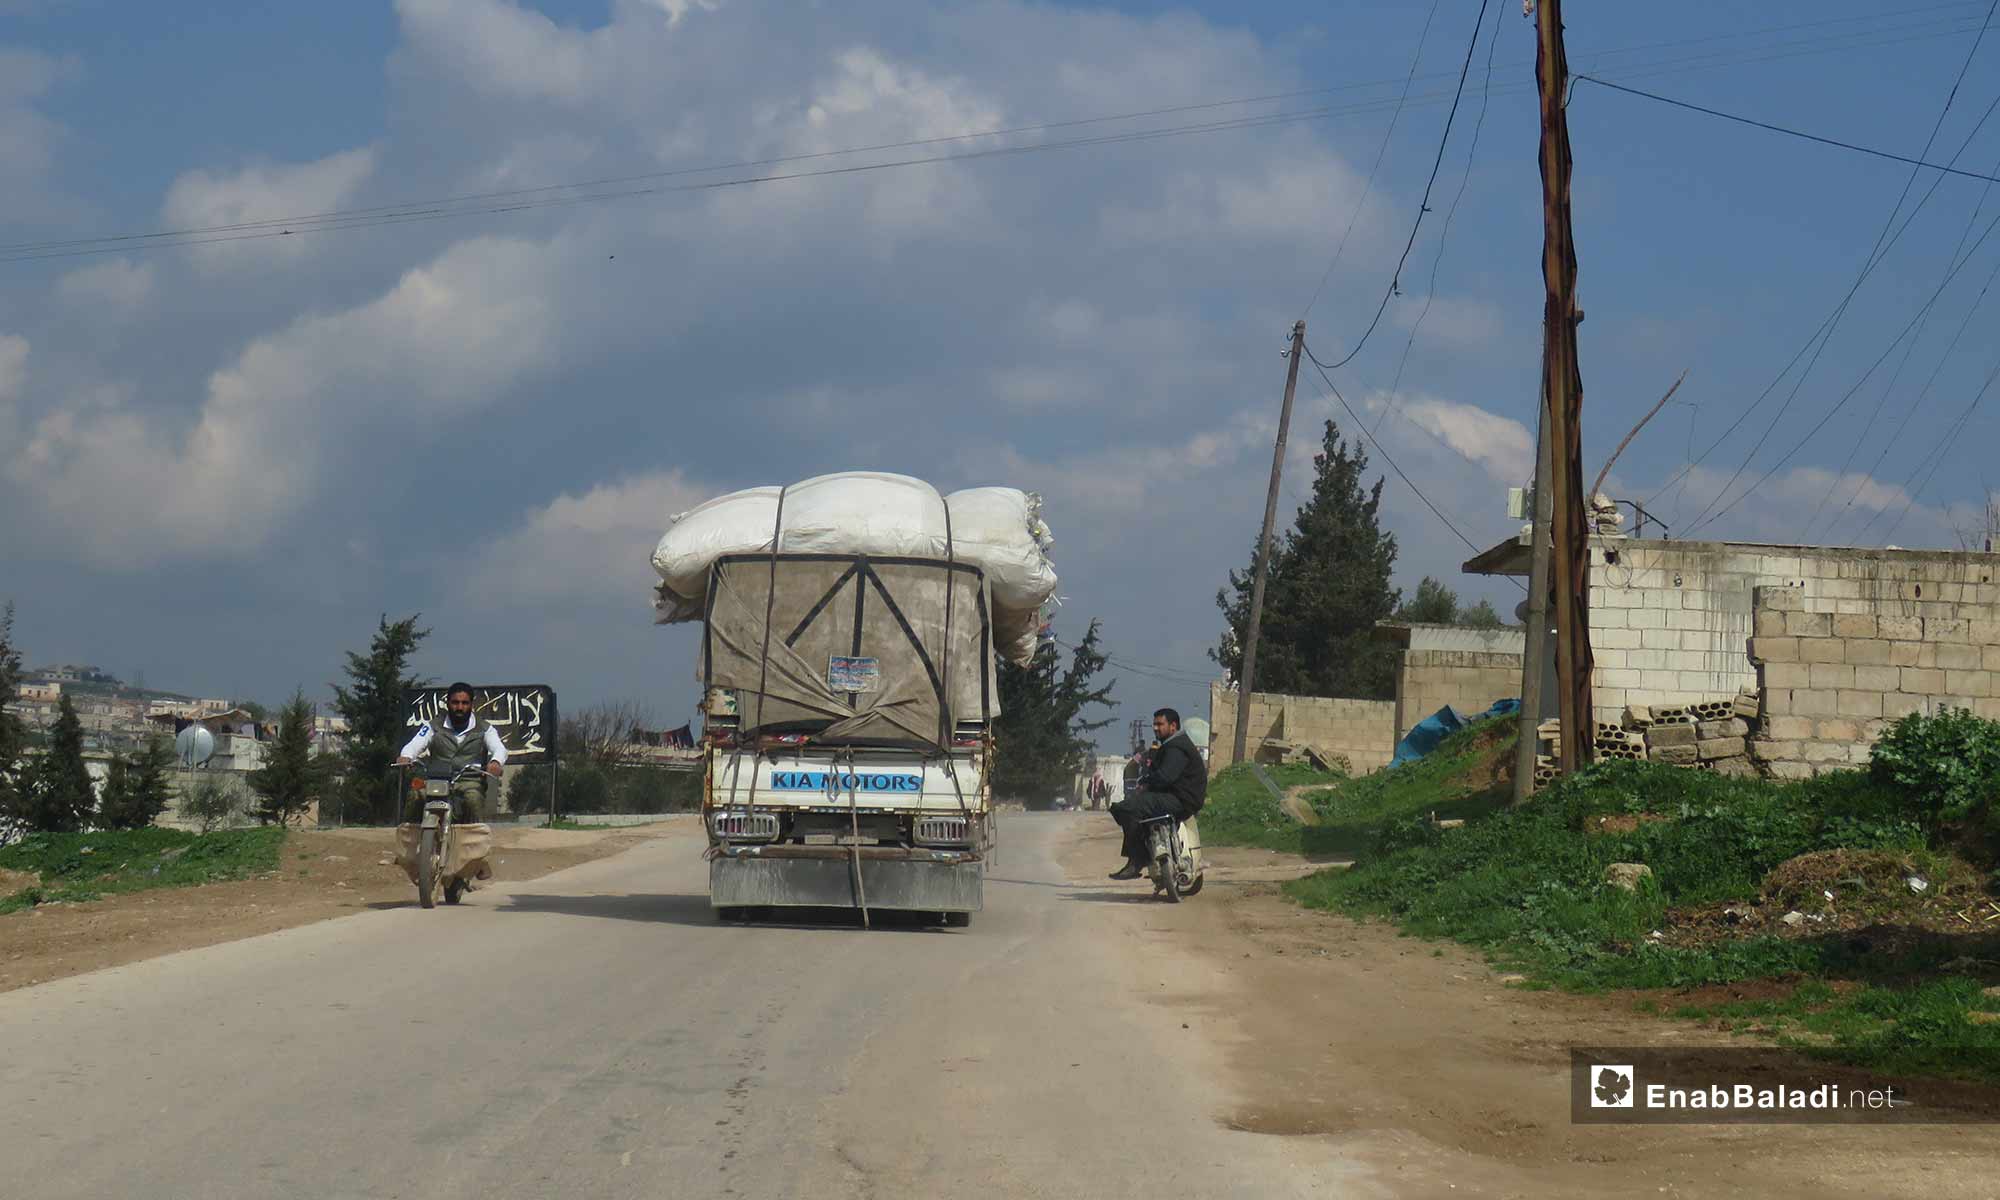 Qalaat al-Madiq’s people are yet being displaced due to constant shelling in rural Hama – February 18, 2019 (Enab Baladi)